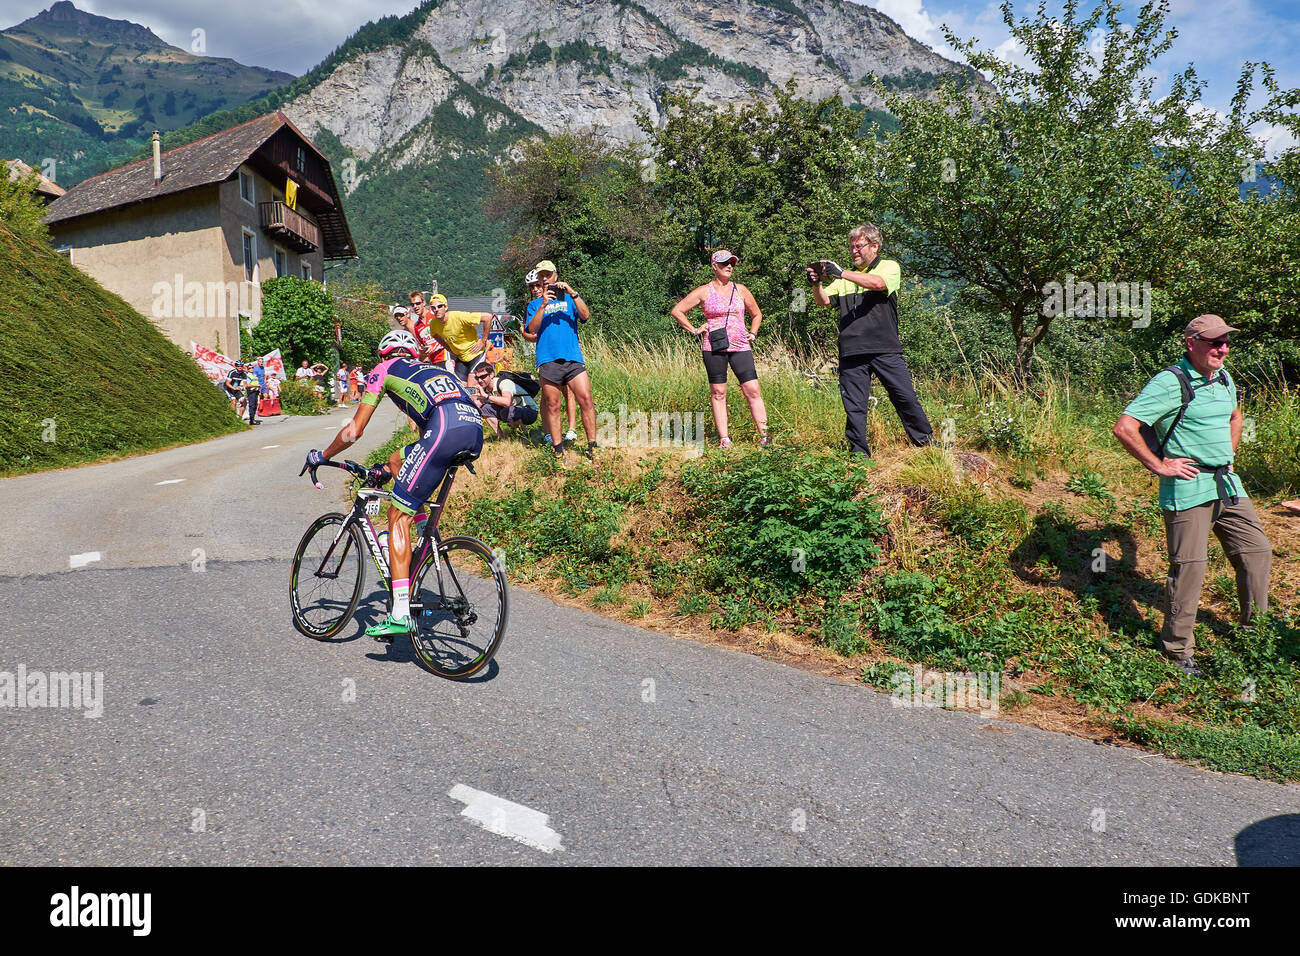 Ruben Plaza Molina, from team Lampre, in a hairpin turn on the mountain roads on his way up in Tour de France Stock Photo